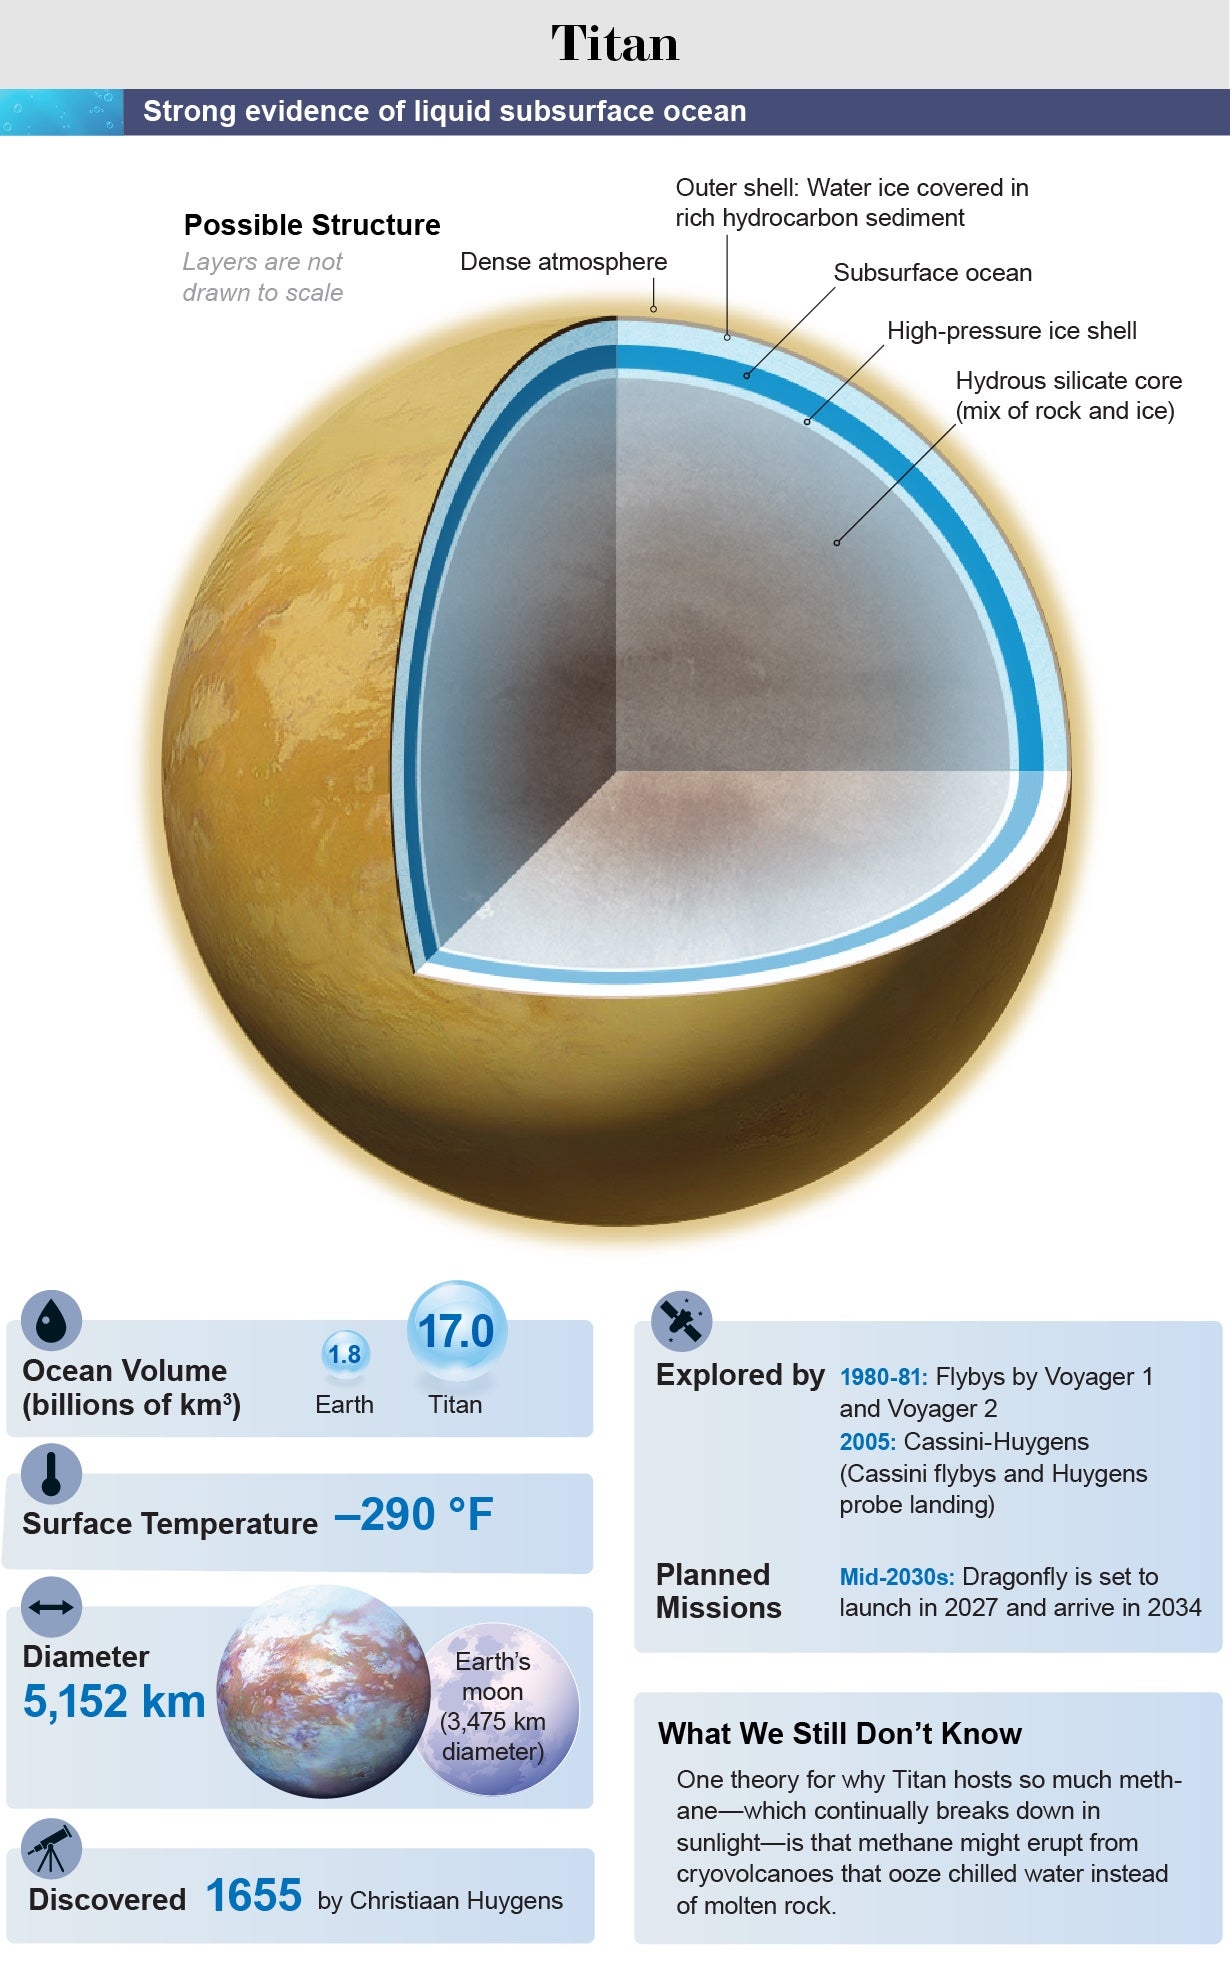 View inside Titan—showing dense atmosphere, outer shell of water ice covered in rich hydrocarbon sediment, subsurface ocean, high-pressure ice shell, and hydrous silicate core—paired with moon statistics.